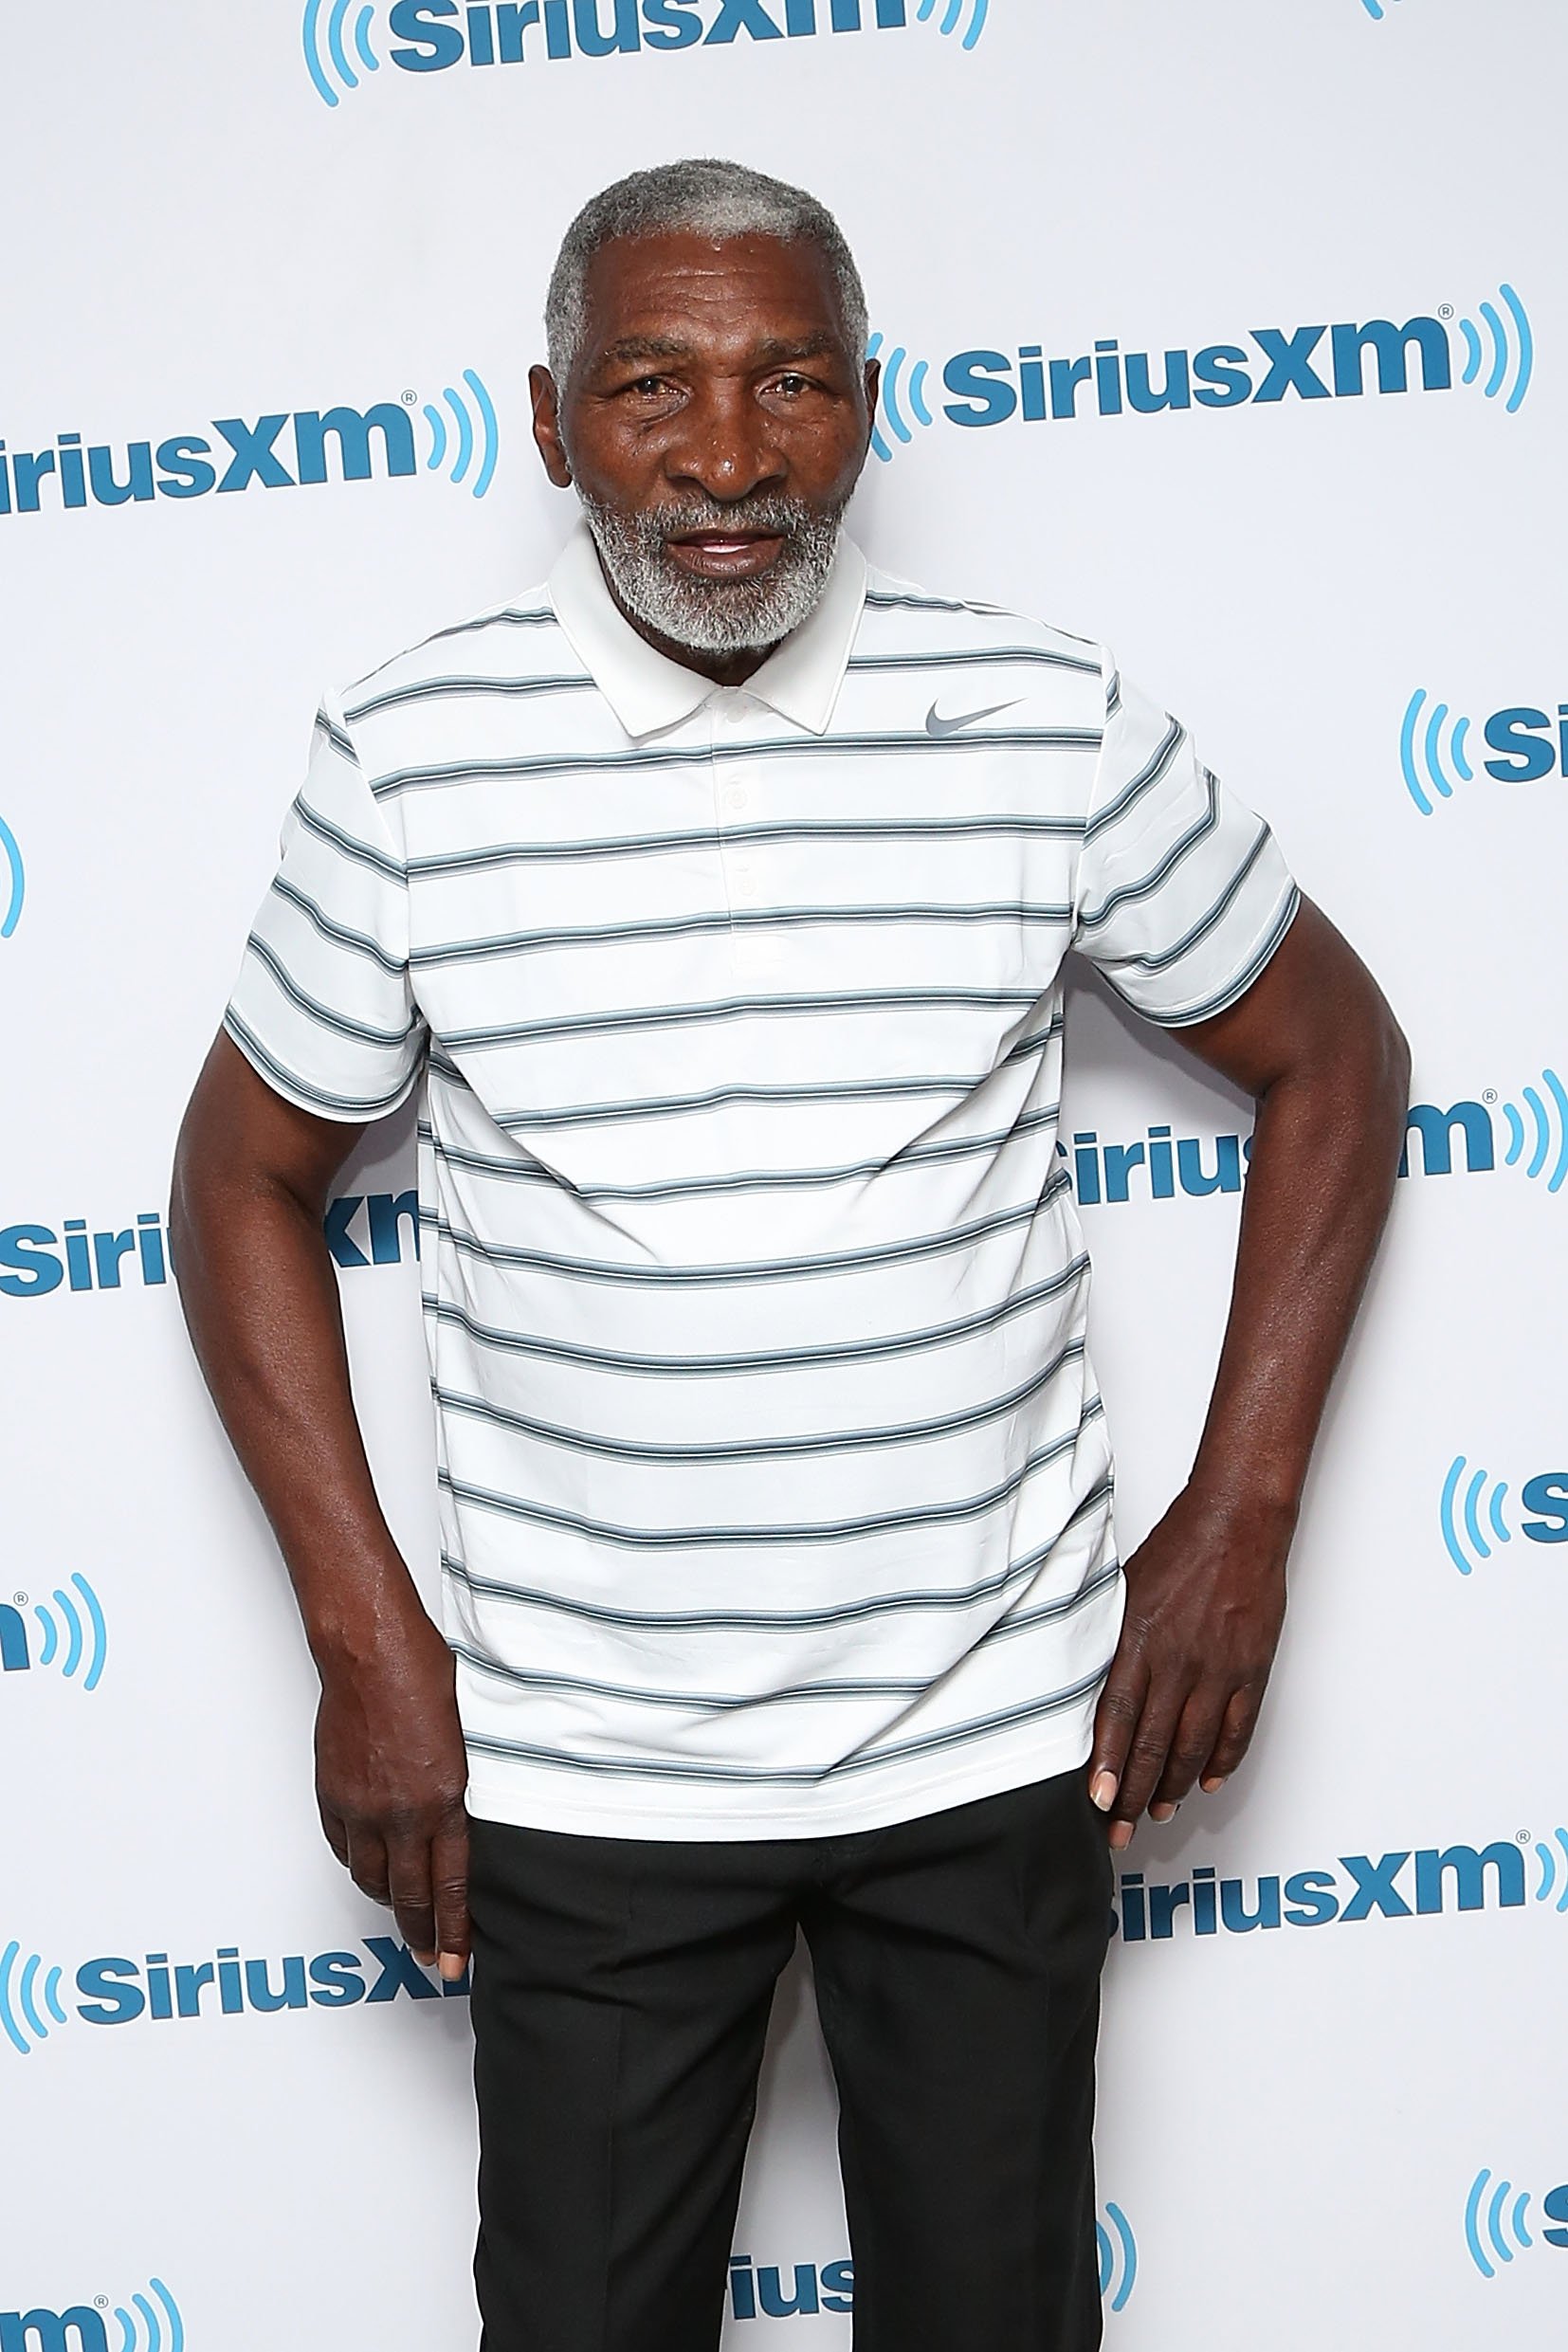  Richard Williams, father of Venus Williams and Serena Williams, visits the SiriusXM Studios on May 6, 2014 in New York City. | Source: Getty Images